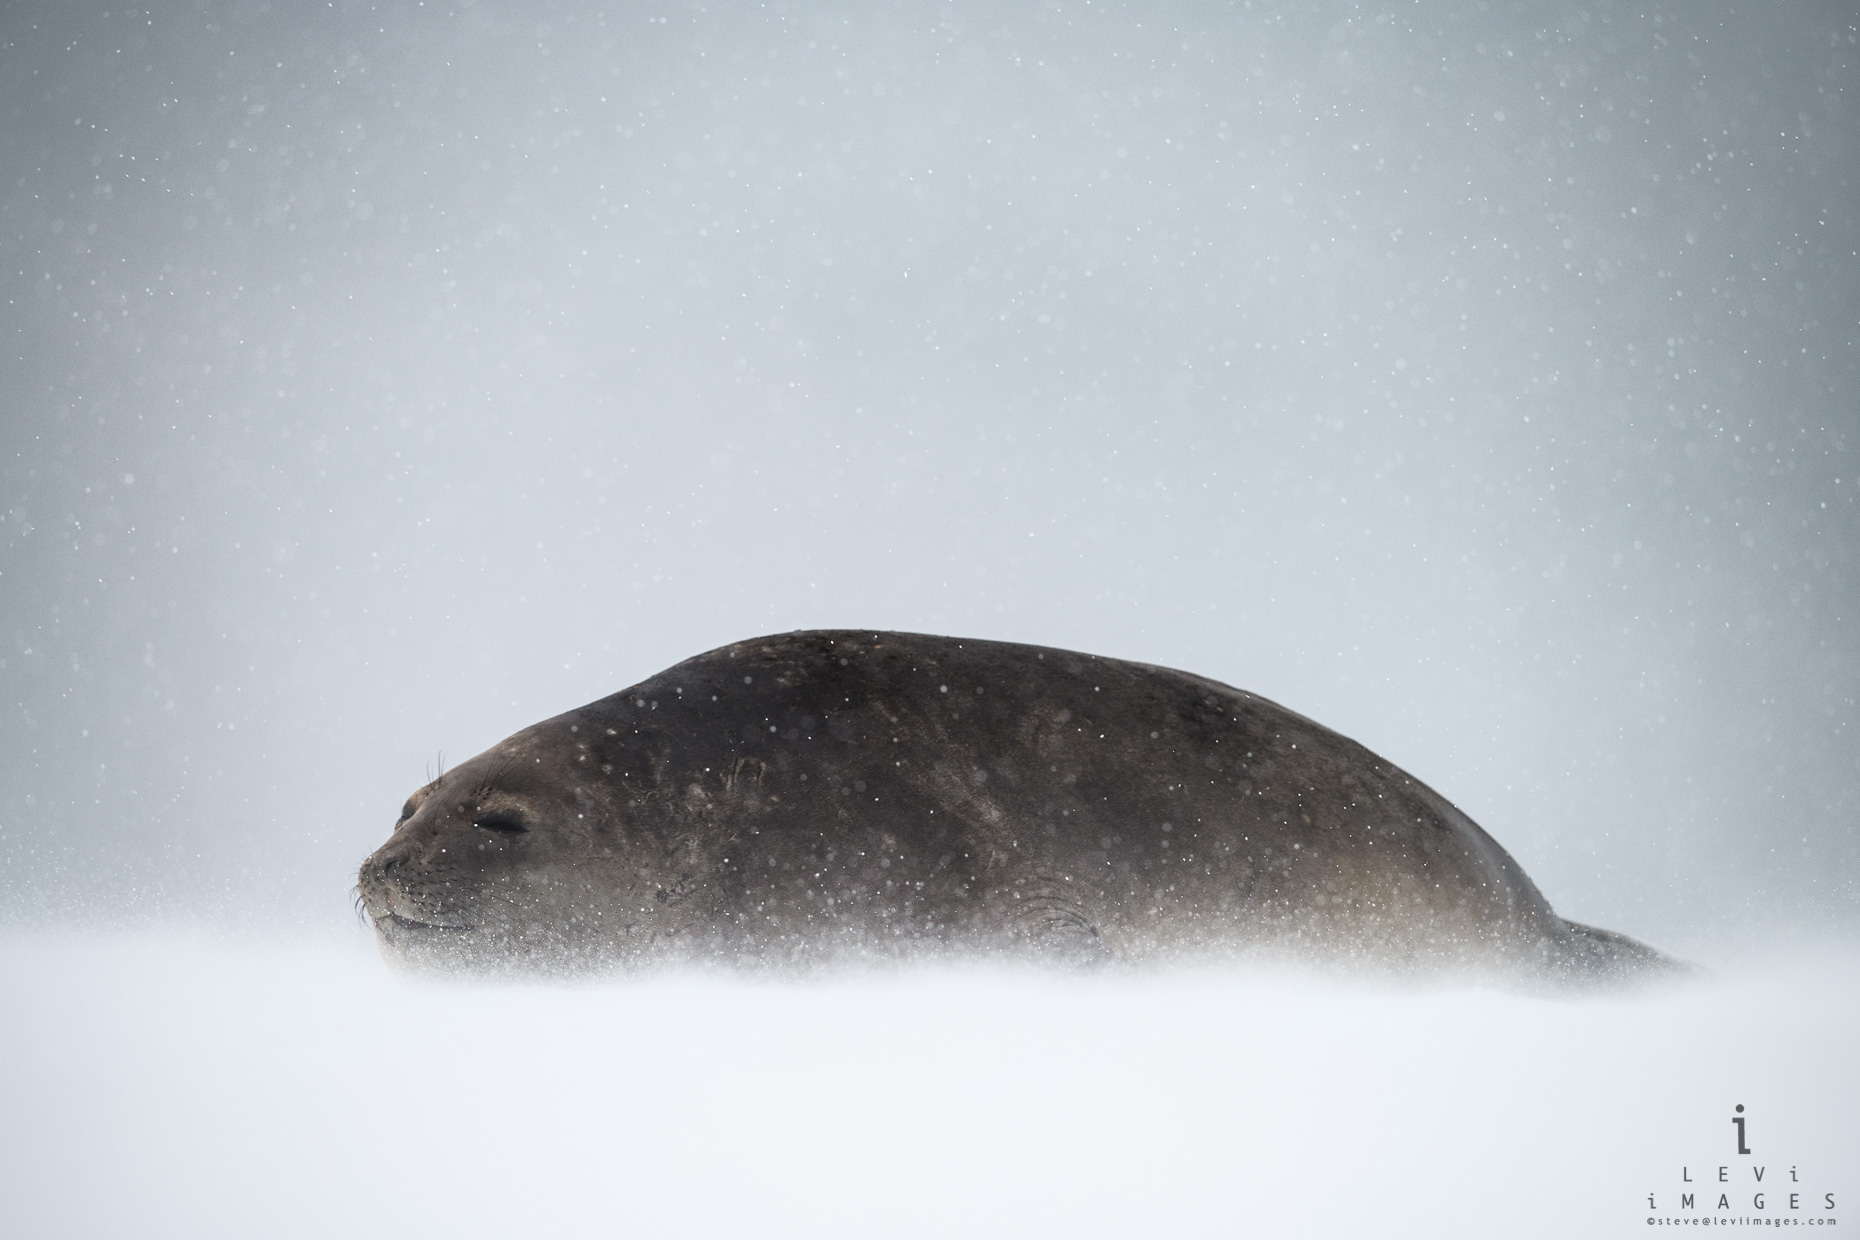 Southern elephant seal (Mirounga leonina) rest during snowstorm. Turreted Point, Antarctica